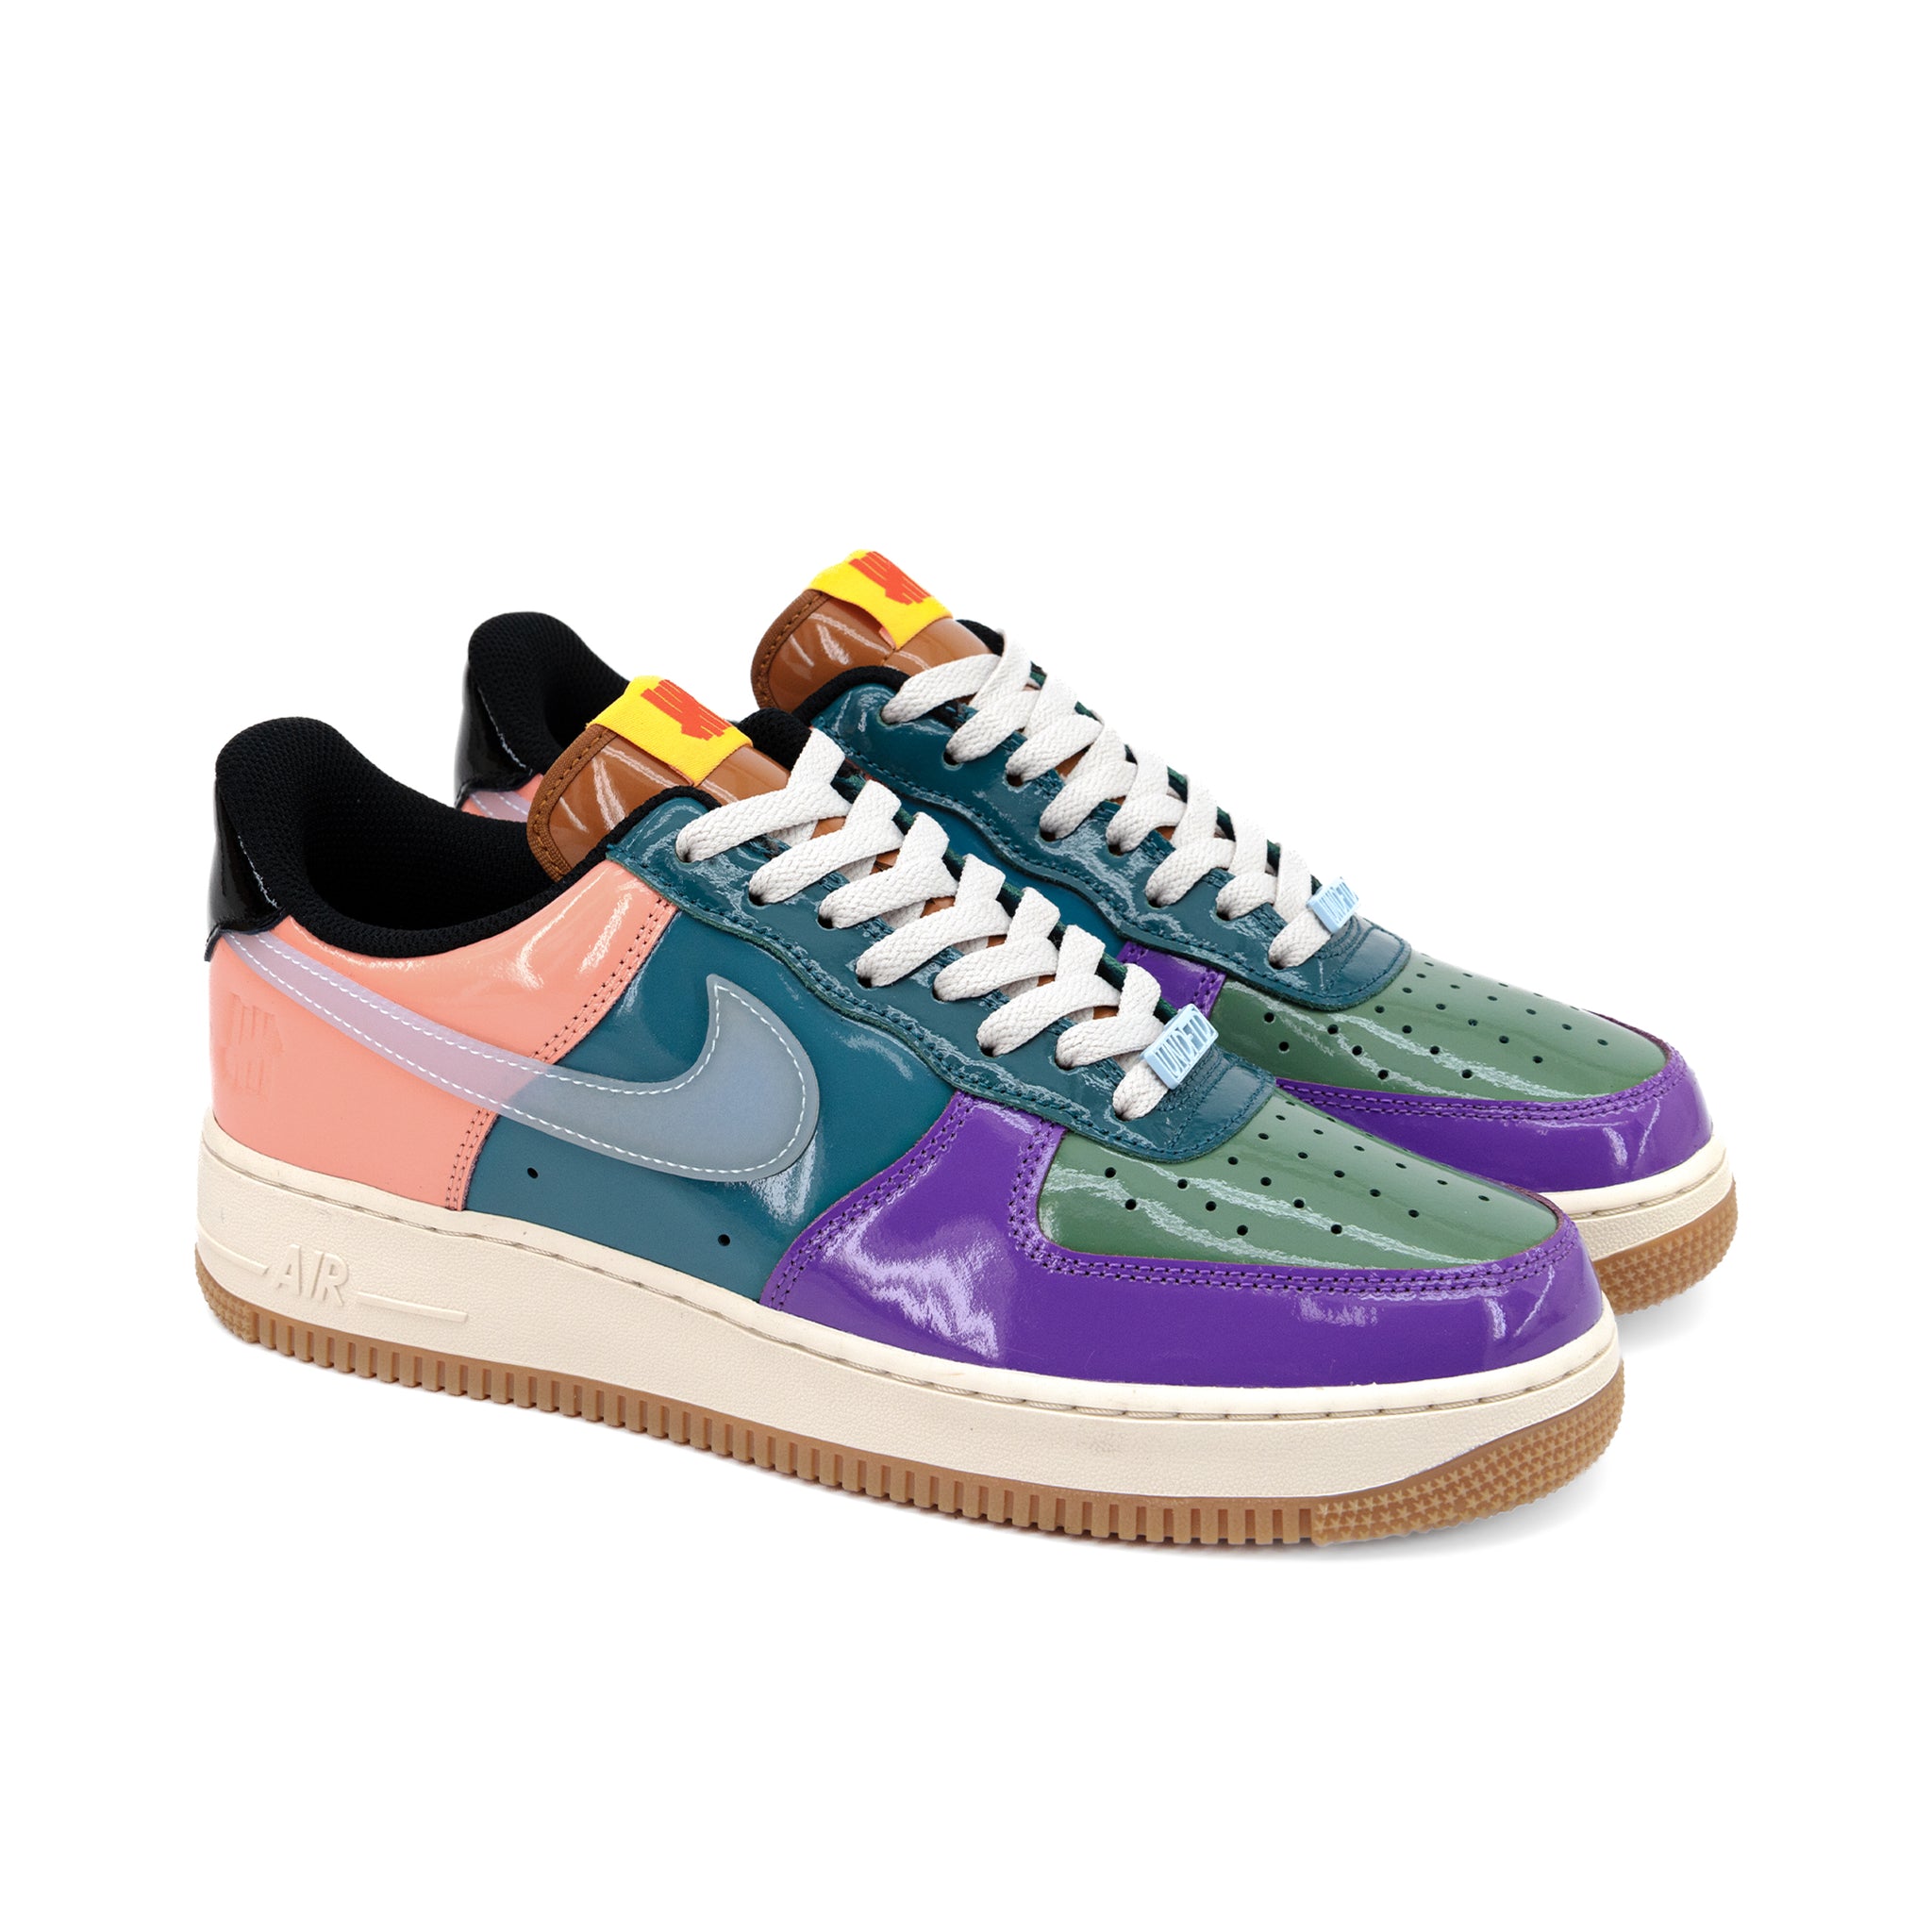 NIKE AIR FORCE 1 LOW SP UNDEFEATED 28cm